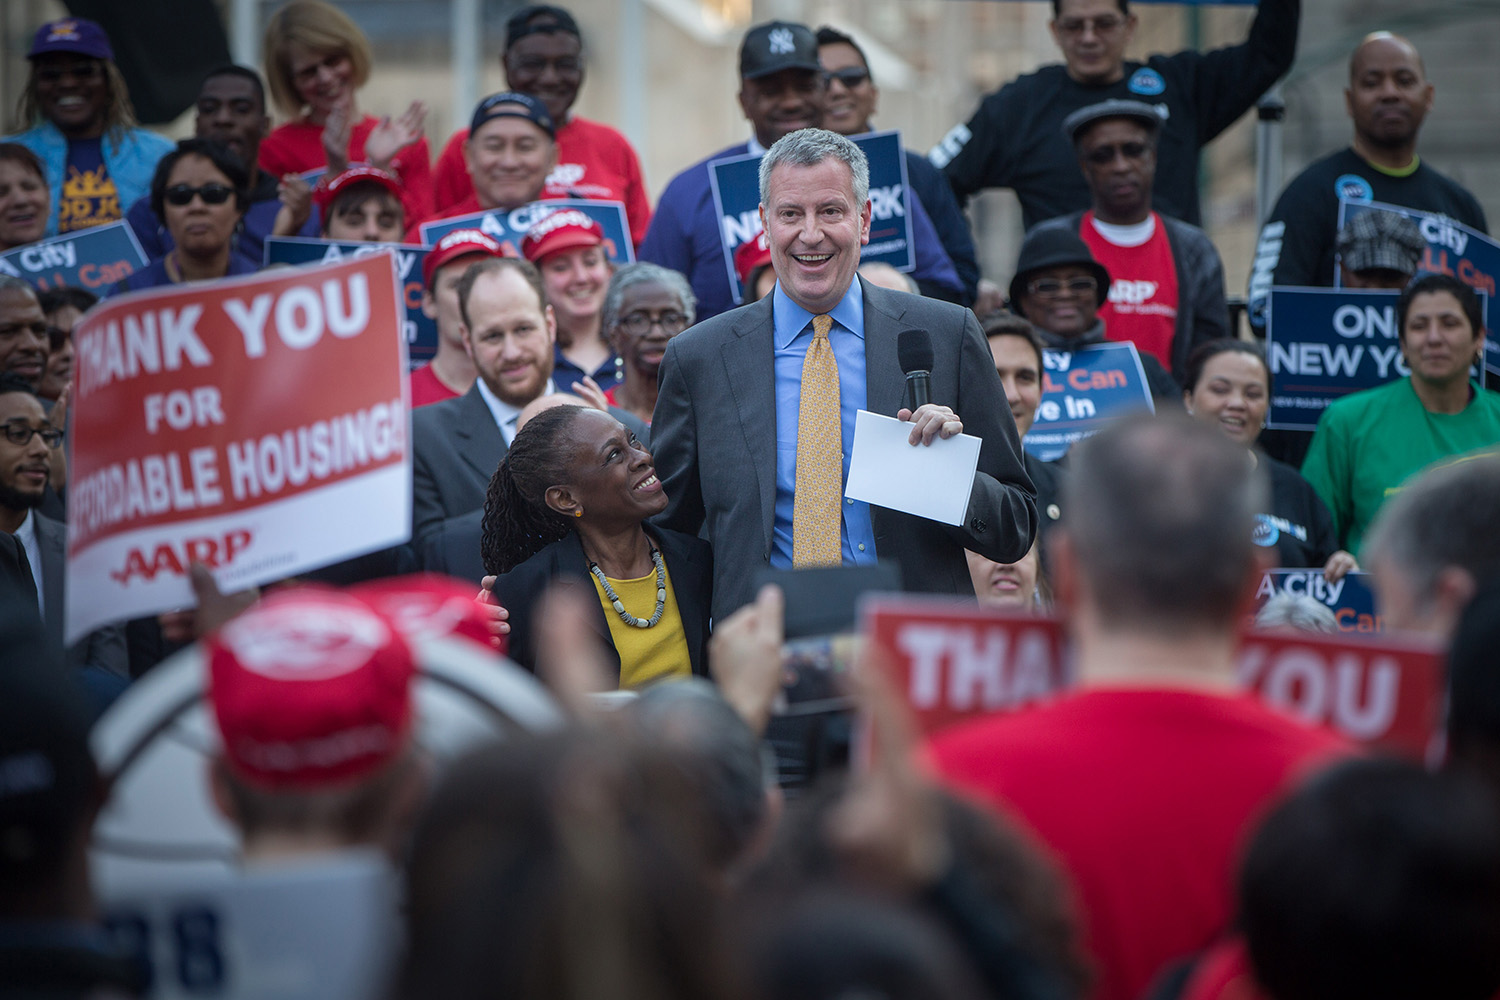 Mayor Bill de Blasio, New York City First Lady Chirlane McCray, United States Secretary of Housing and Urban Development Julián Castro and City Council Speaker Melissa Mark-Viverito lead a rally in Foley Square in Manhattan to celebrate the passage of the housing legislation.